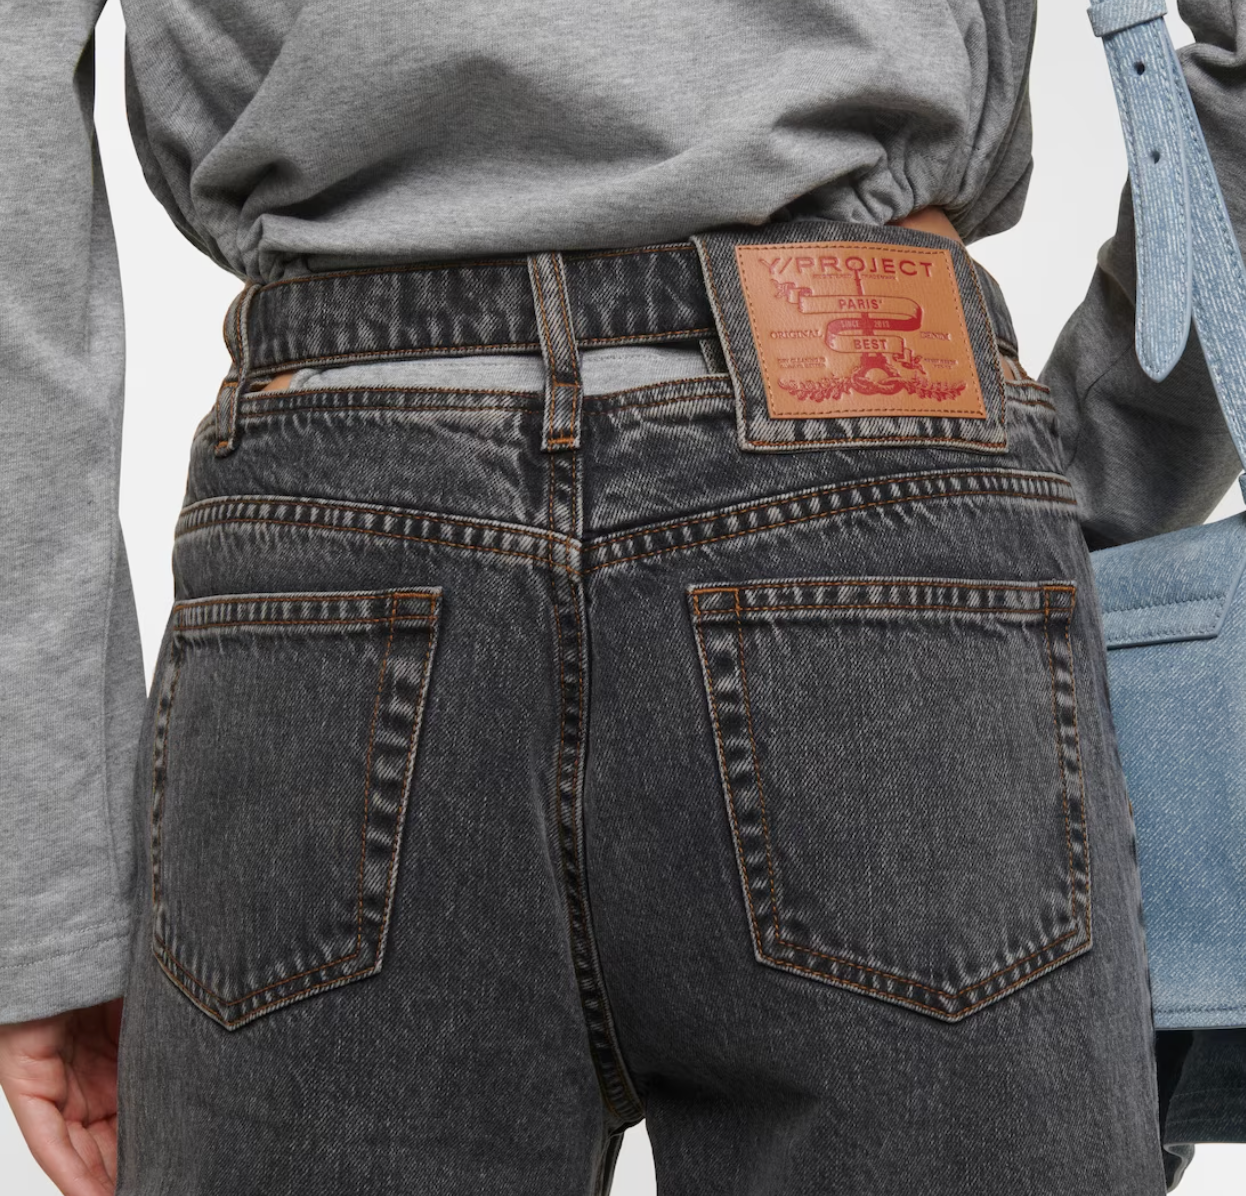 Y/Project has introduced digital product passports into its Evergreen denim line alongside Arianee. Photo: Y/Project